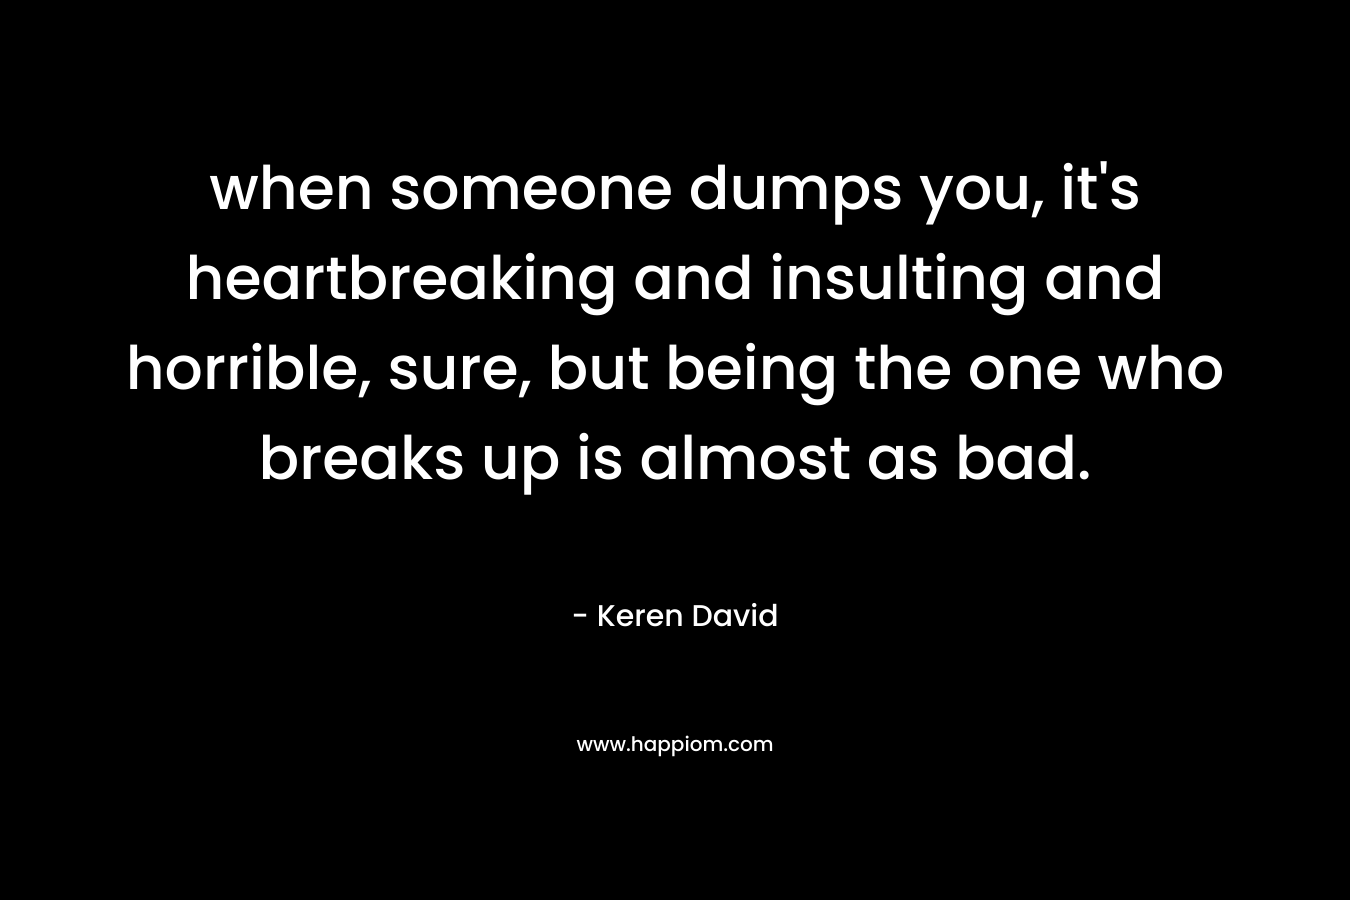 when someone dumps you, it’s heartbreaking and insulting and horrible, sure, but being the one who breaks up is almost as bad. – Keren David